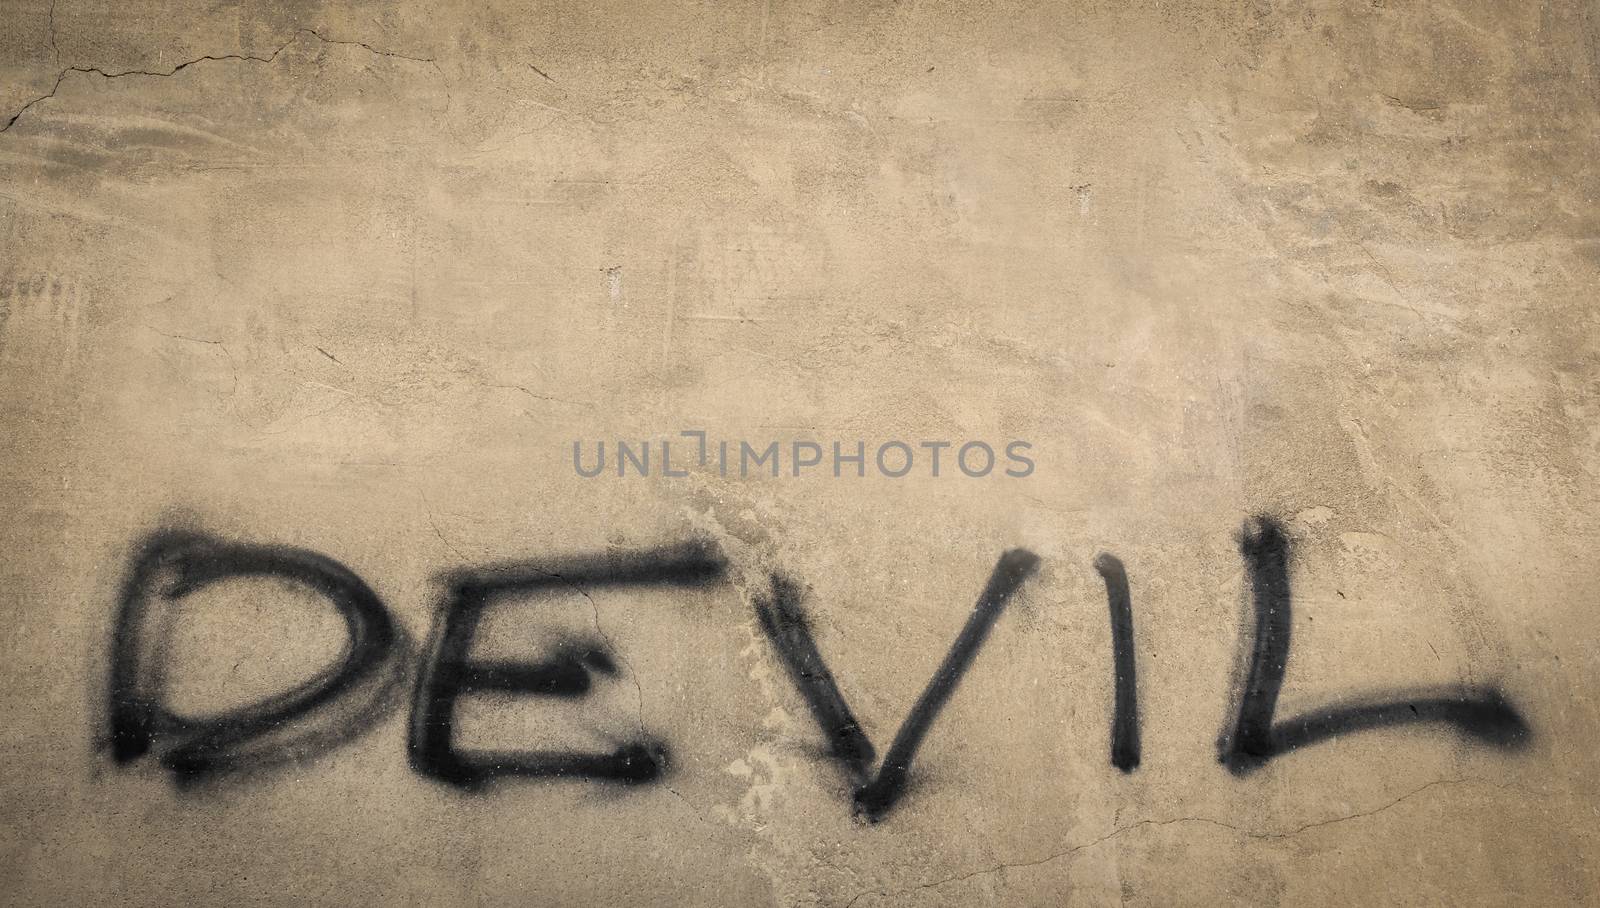 The word "devil" on grungy wall